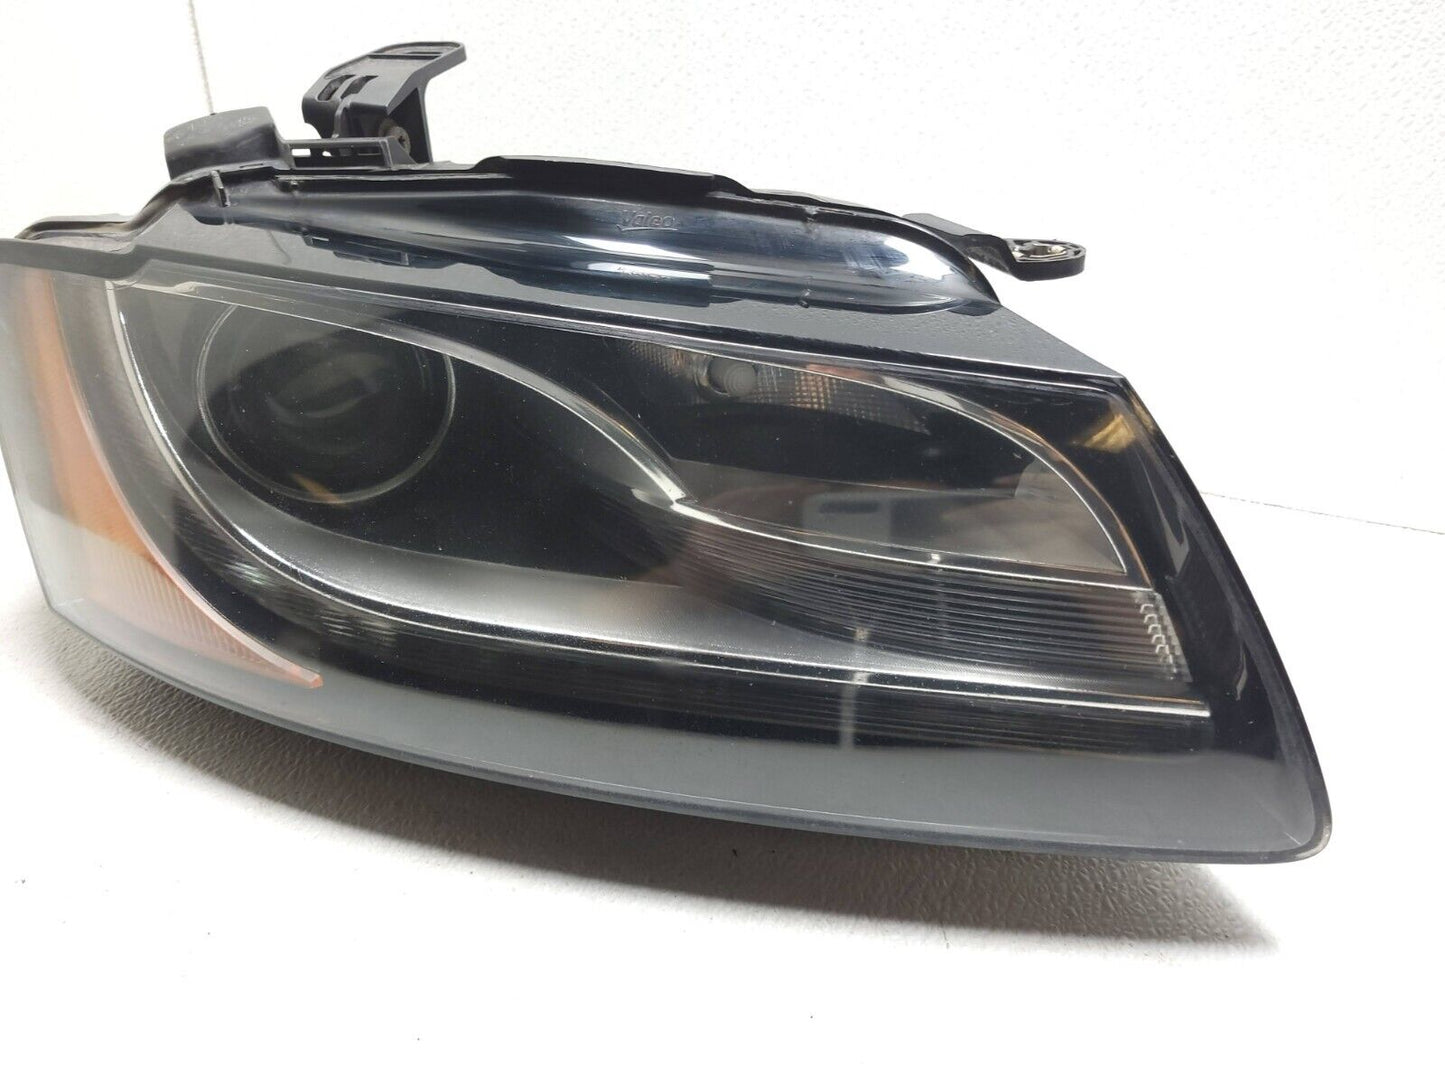 08 09 10 11 Audi A5 Coupe Headlight Passenger Side Right  8t0941004am OEM